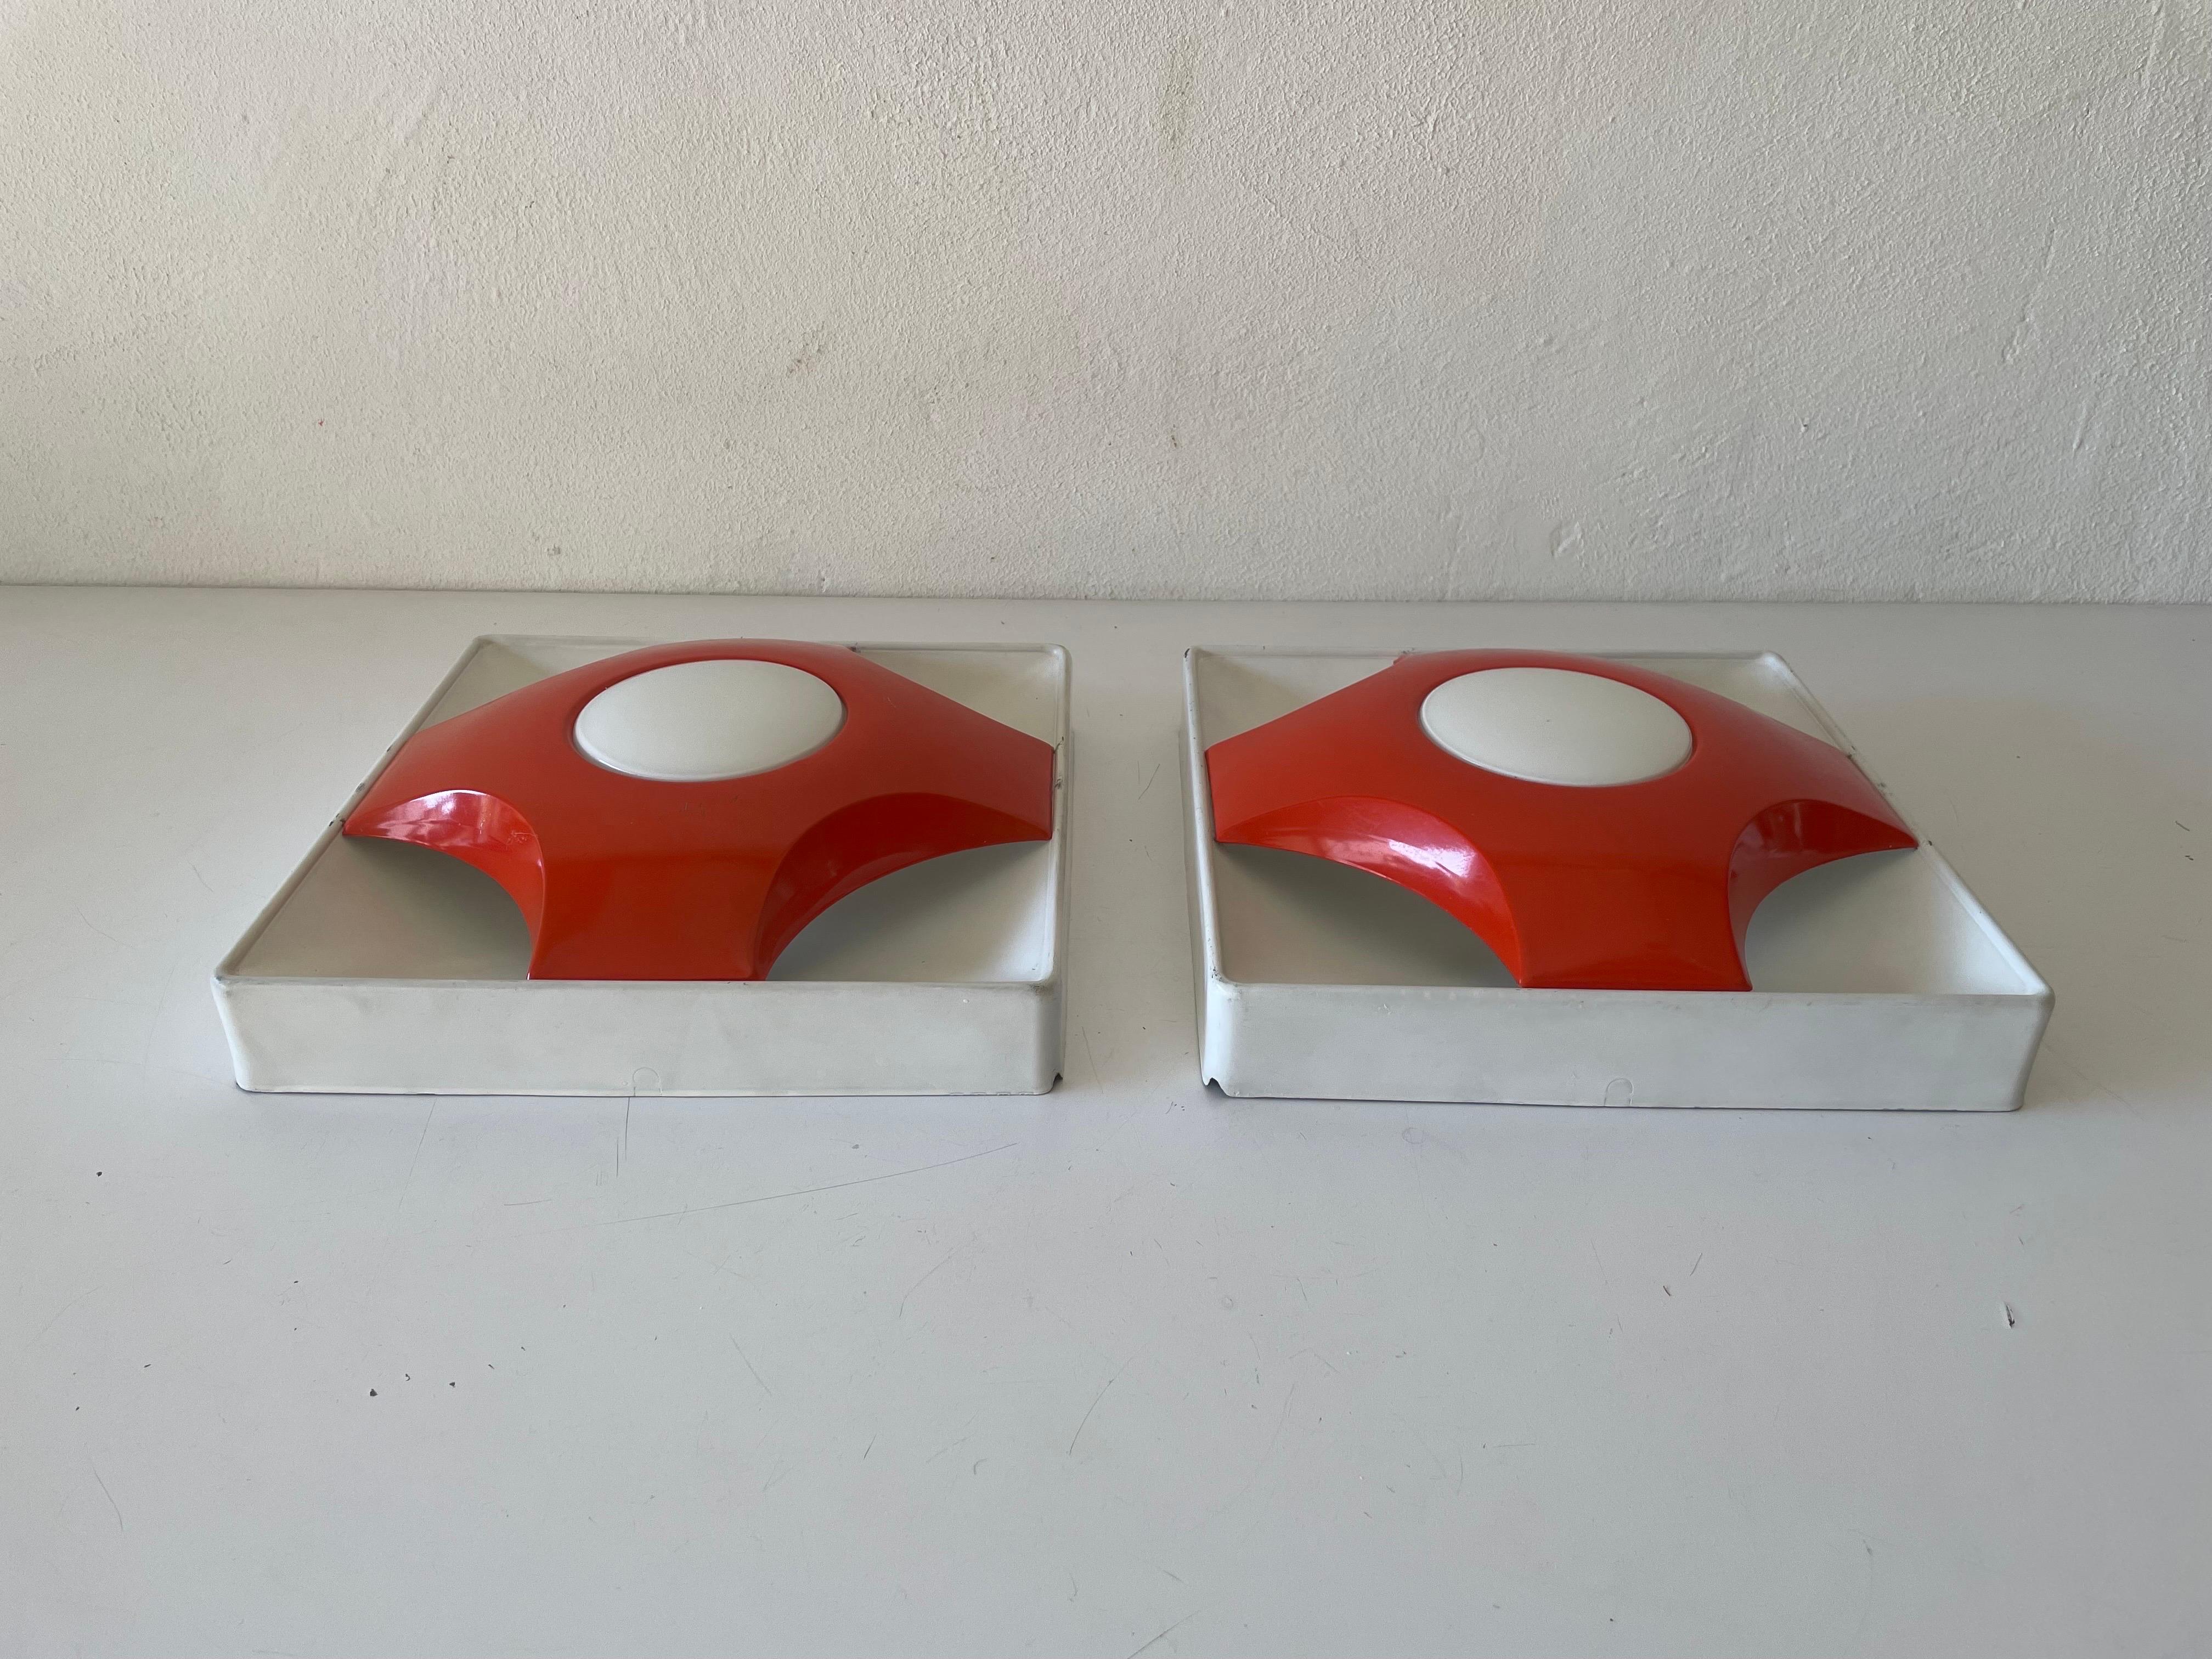 Pop Art Rare pair of sconces by Sölken Leuchten, 1970s, Germany

Very elegant and Minimalist wall lamps. They can be use as ceiling lamp
Lamps are in very good condition.

These lamps works with E27 standard light bulbs. 
Wired and suitable to